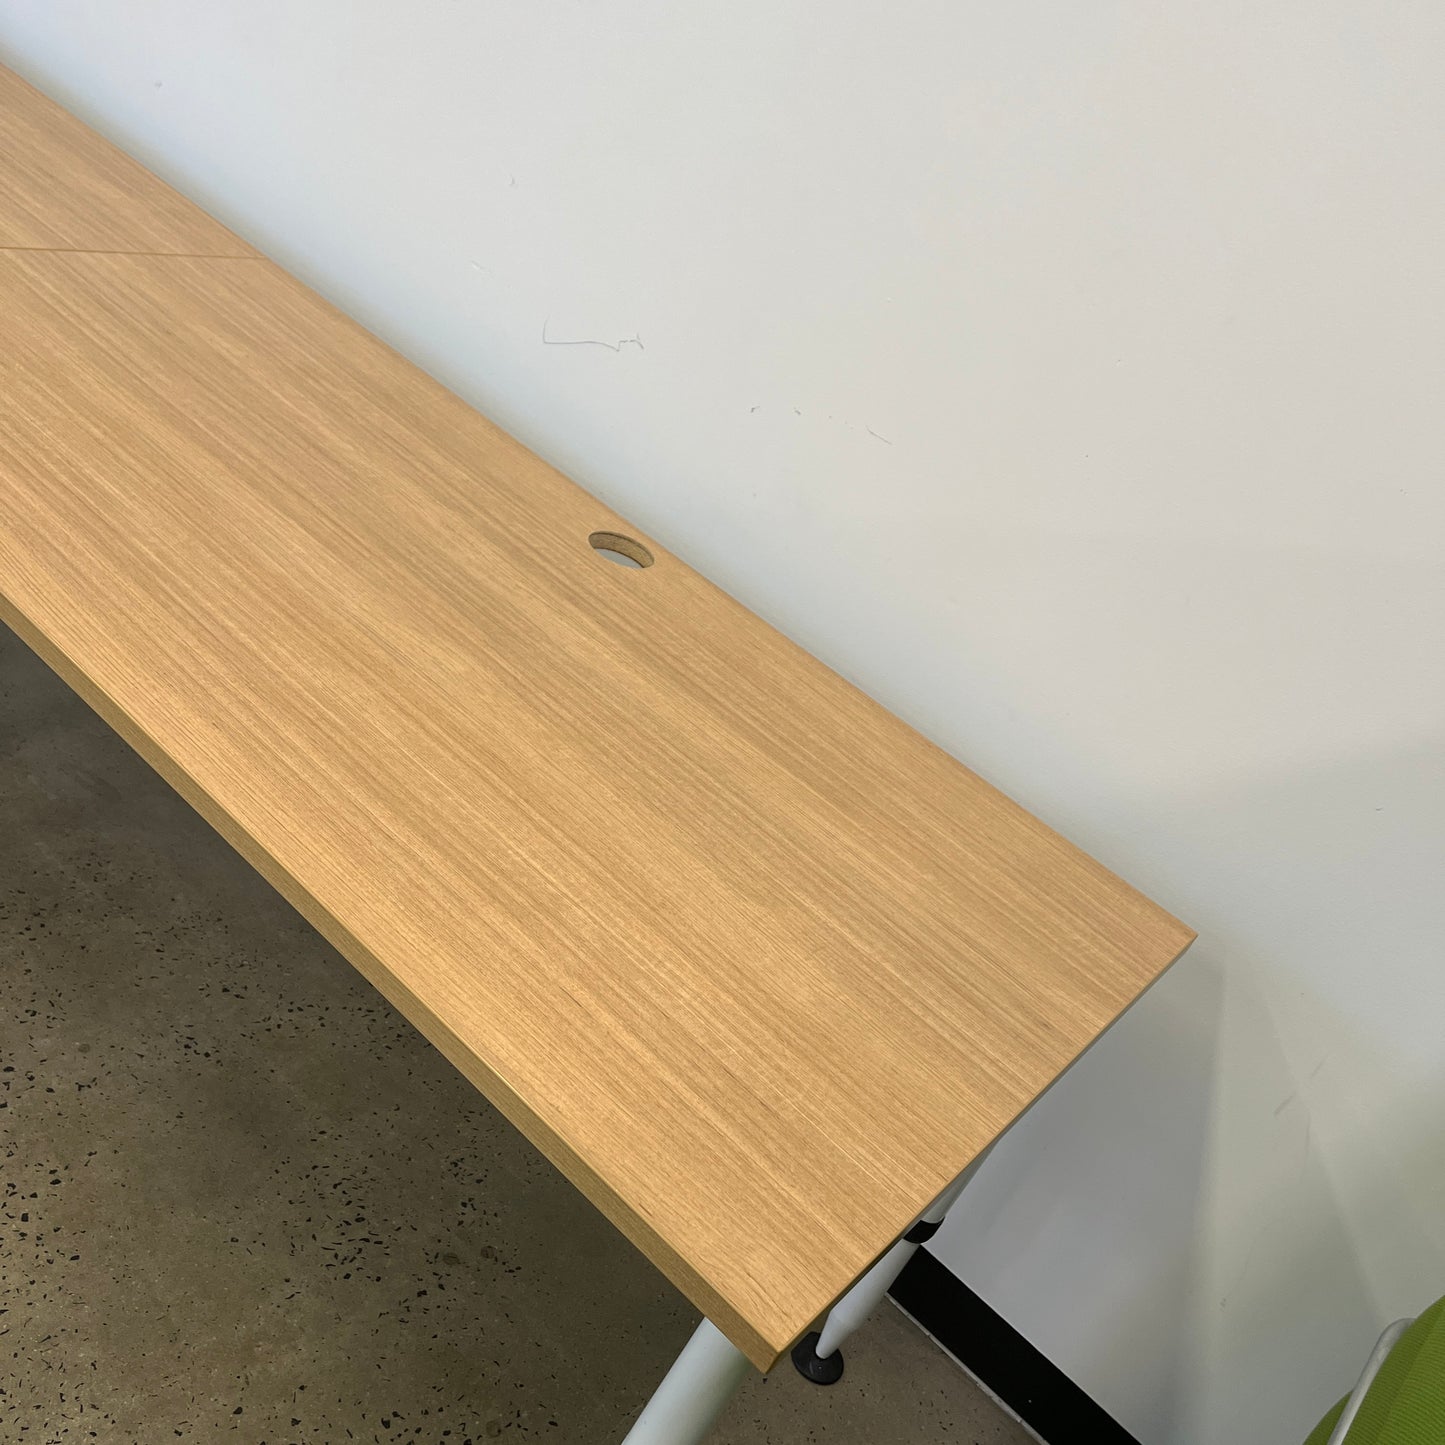 Office Desk with Laminate Wood and Adjustable Legs